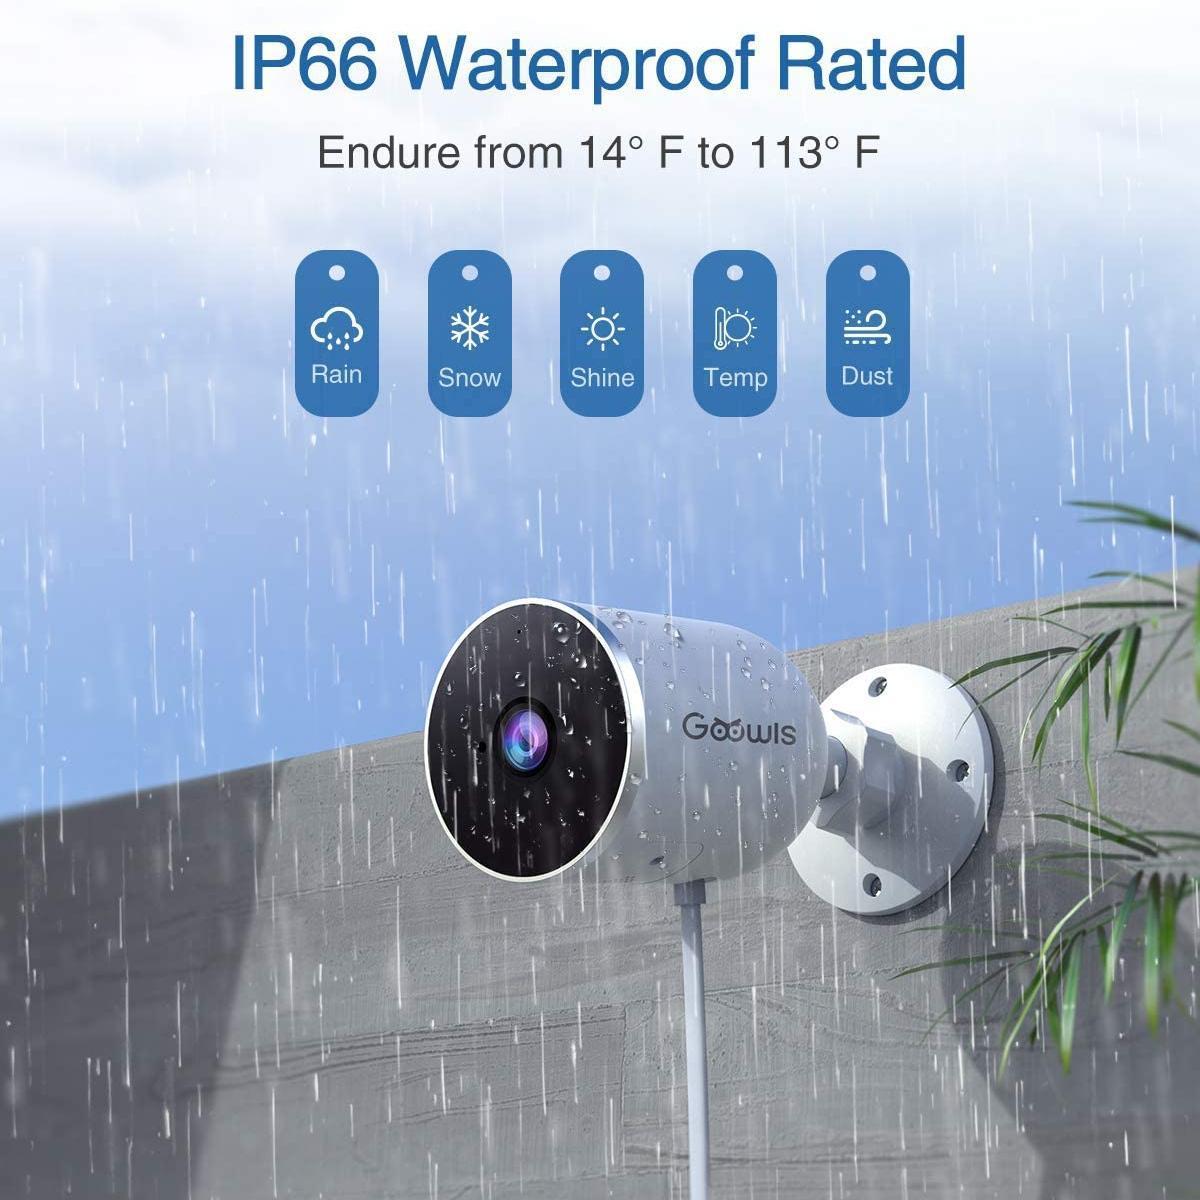 Outdoor Security Camera(IPC4-2-US), Goowls 1080P CCTV Camera Home Surveillance Wired WiFi IP Camera Waterproof Night Vision 2-Way Audio Motion Detection Max 128G SD Card Works with IOS/Androi